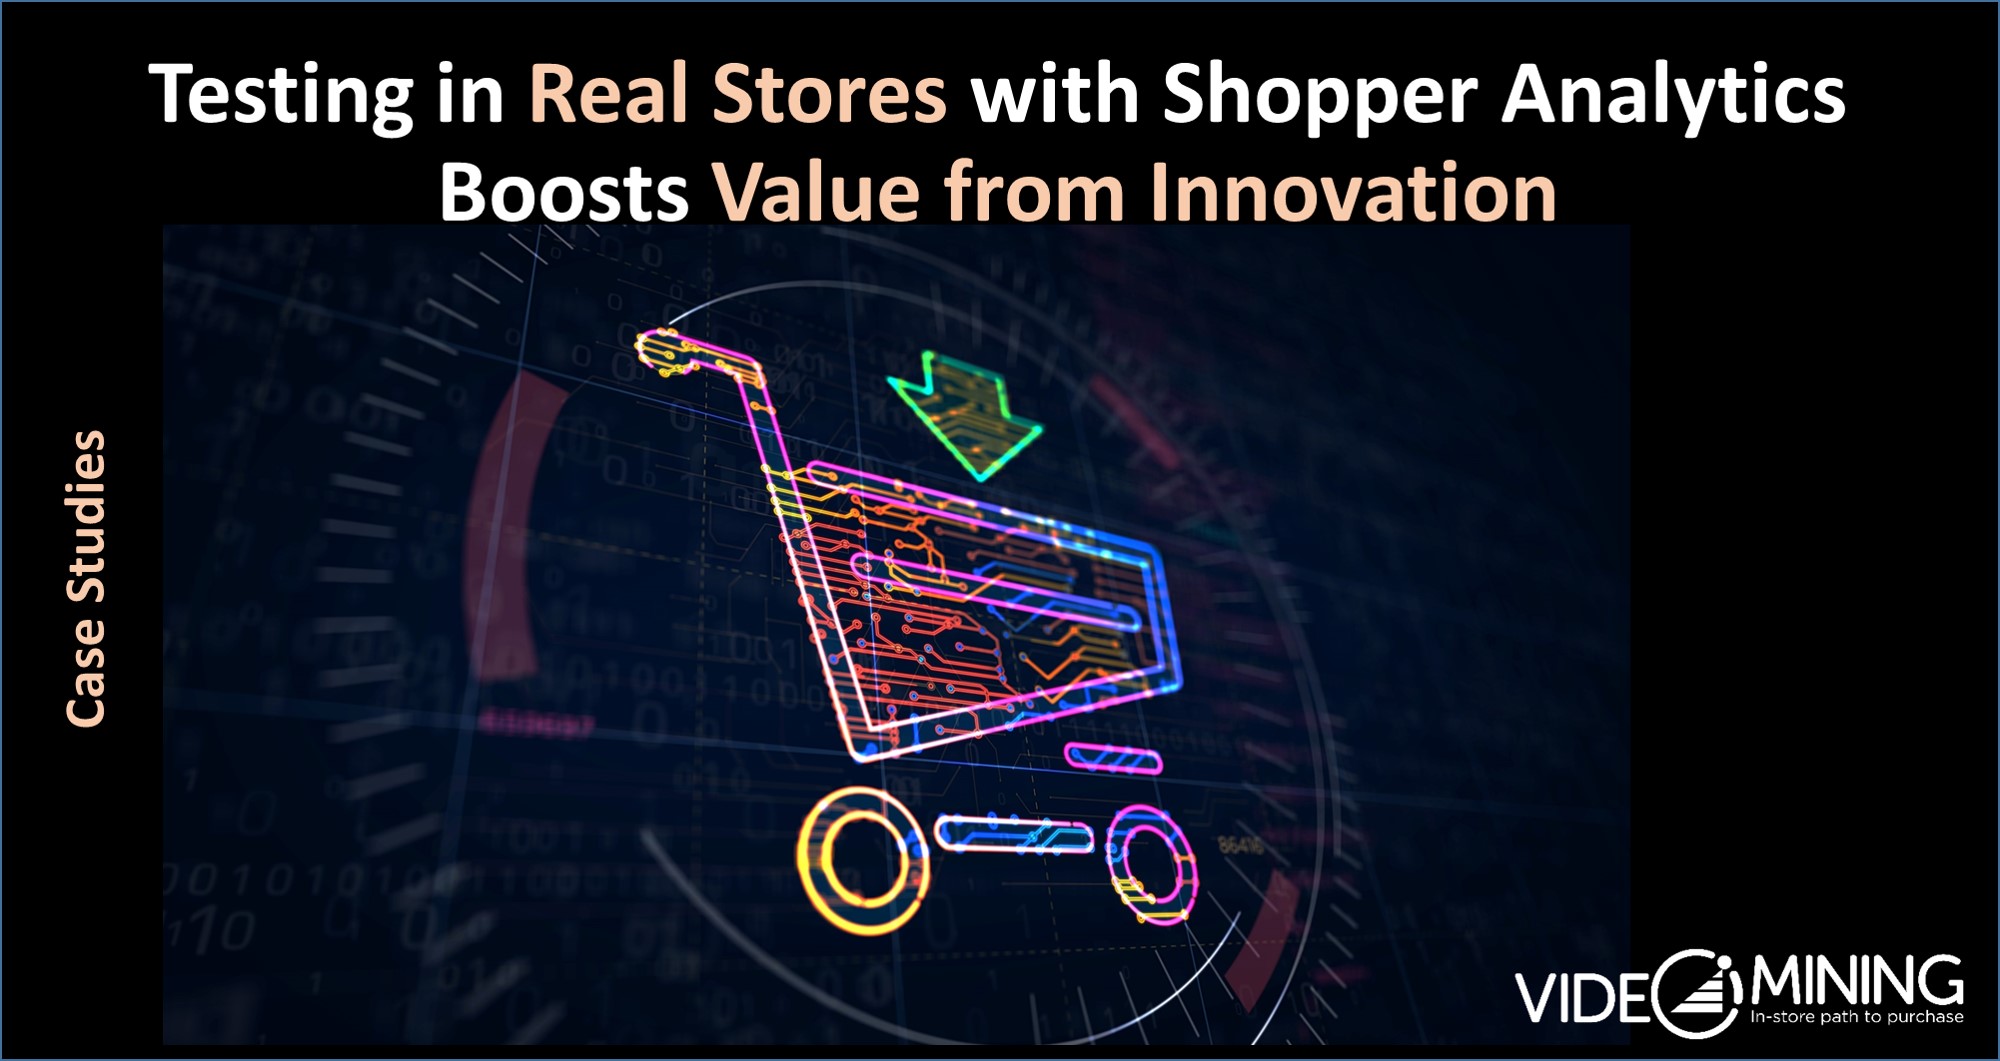 Testing in Real Stores with Shopper Analytics Boosts Value from Innovation